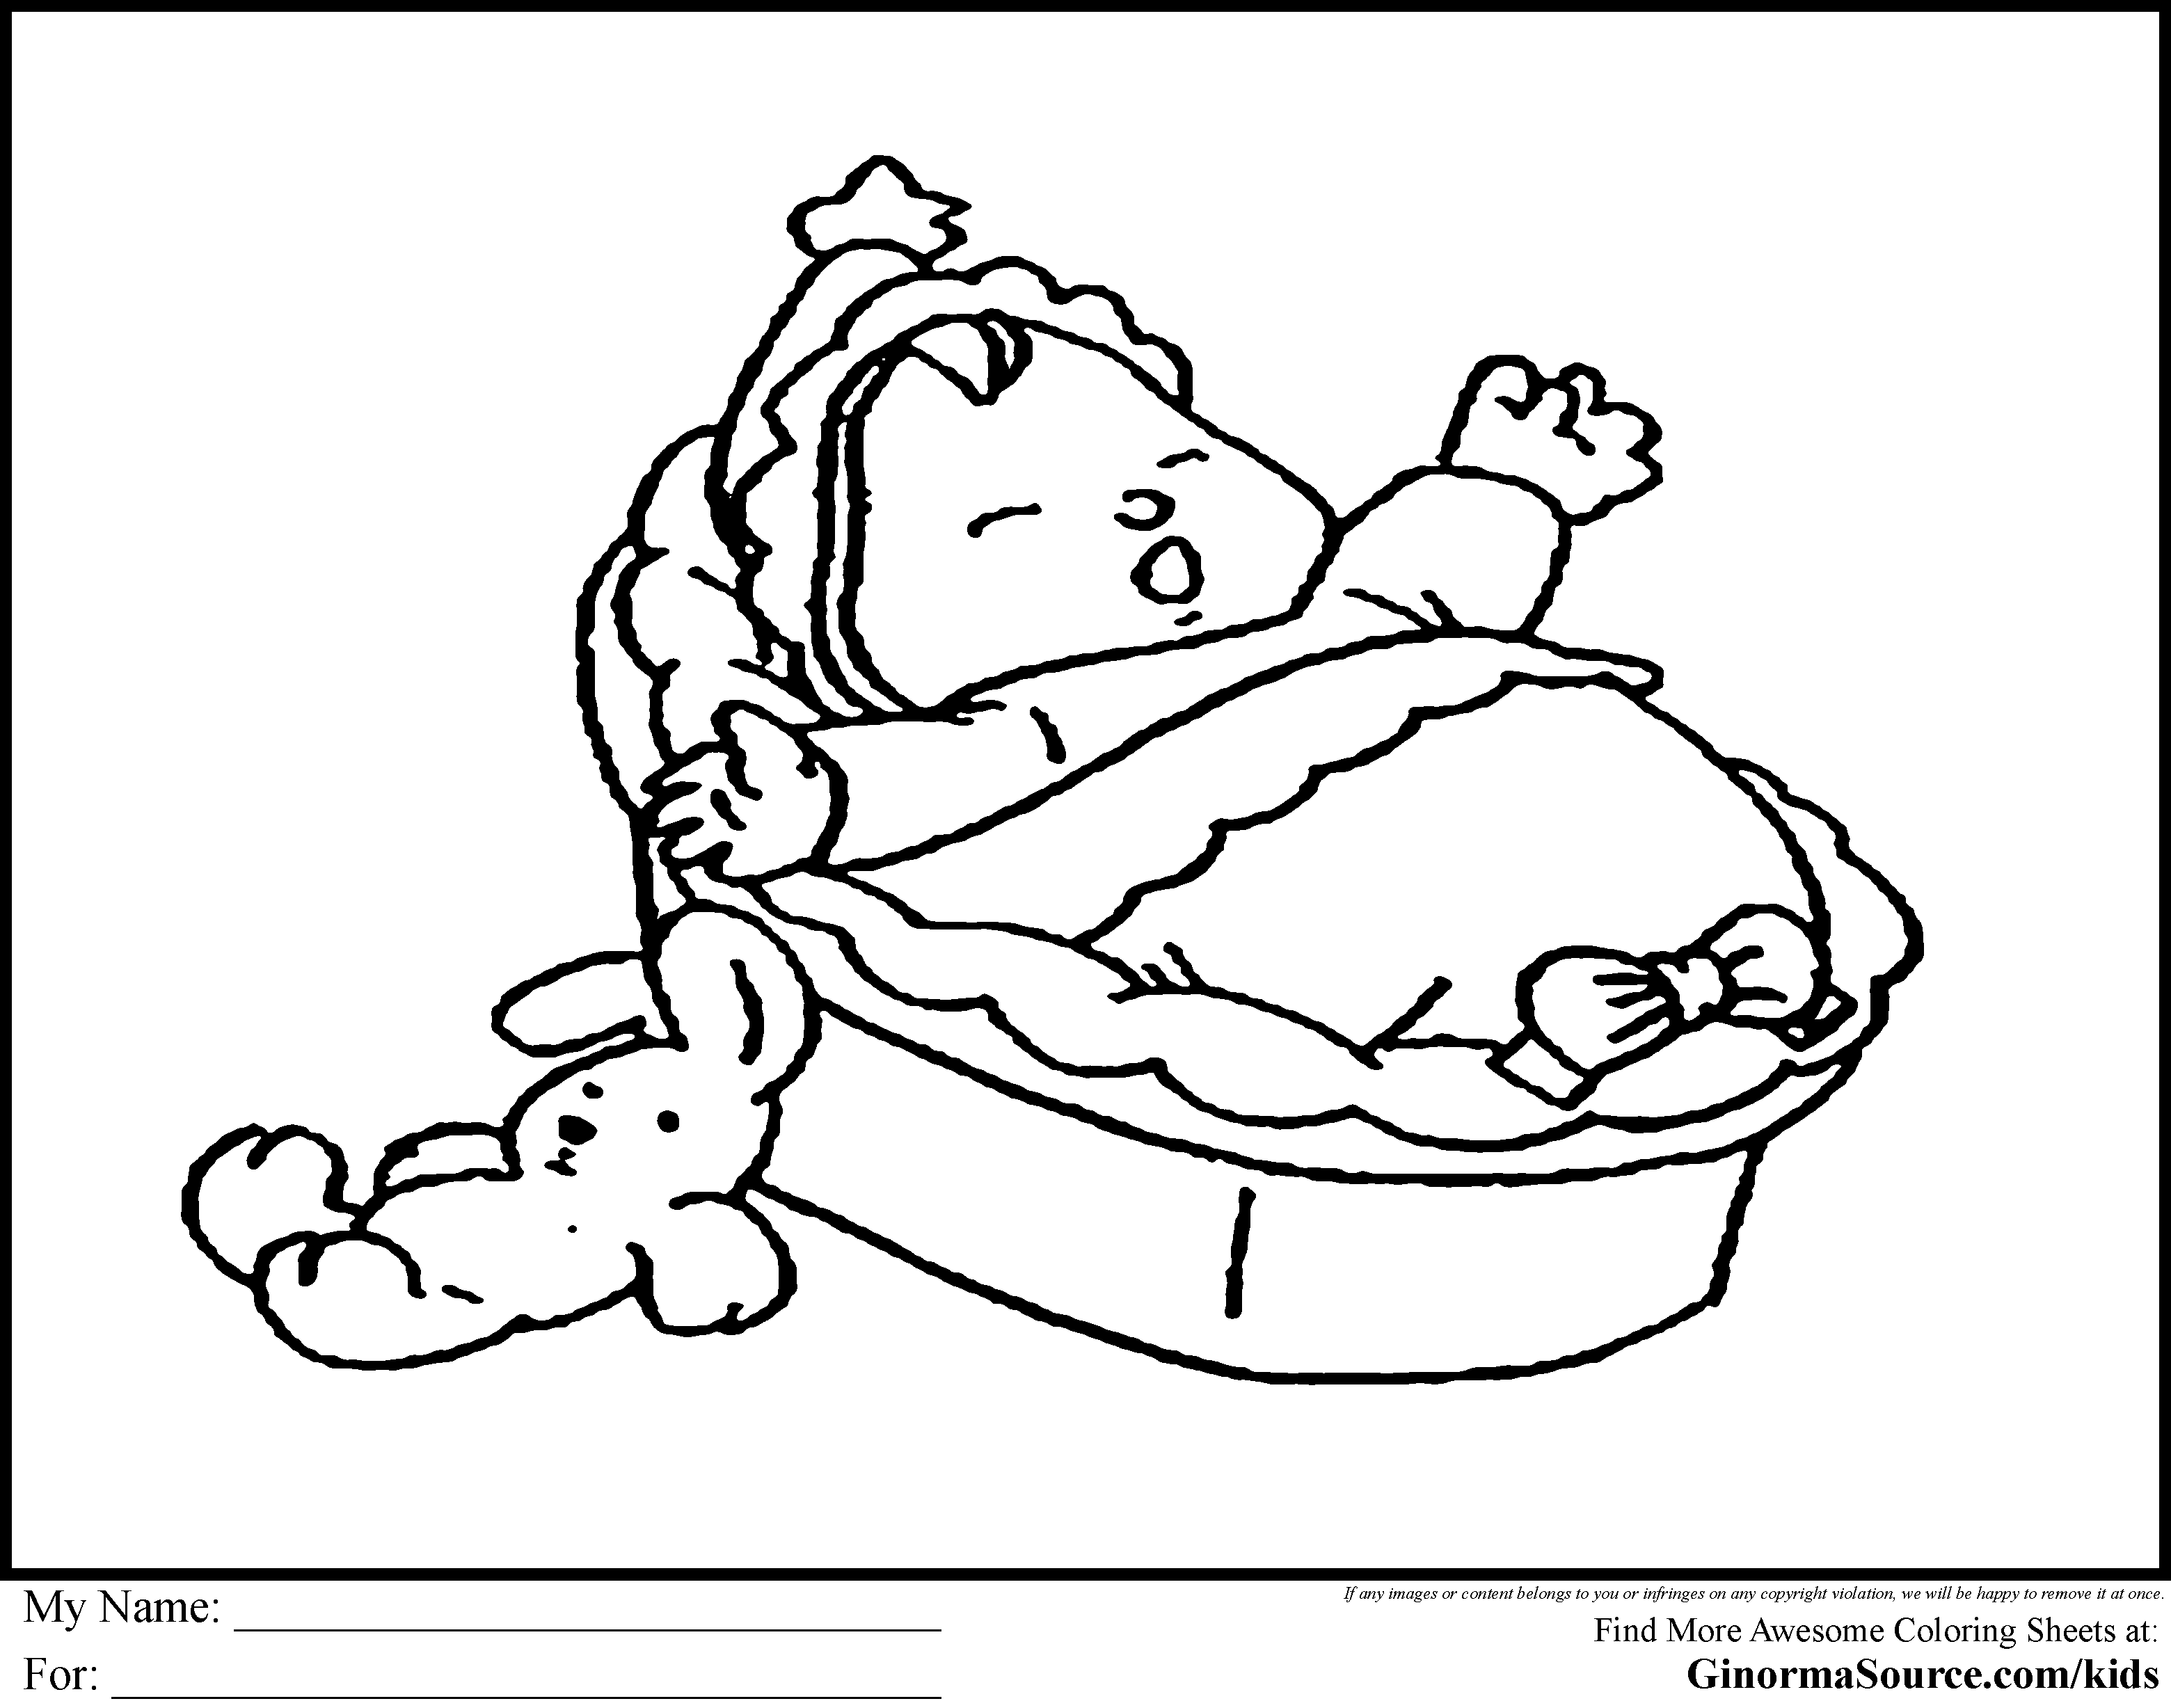 Baby Coloring Sheet - Coloring Pages for Kids and for Adults